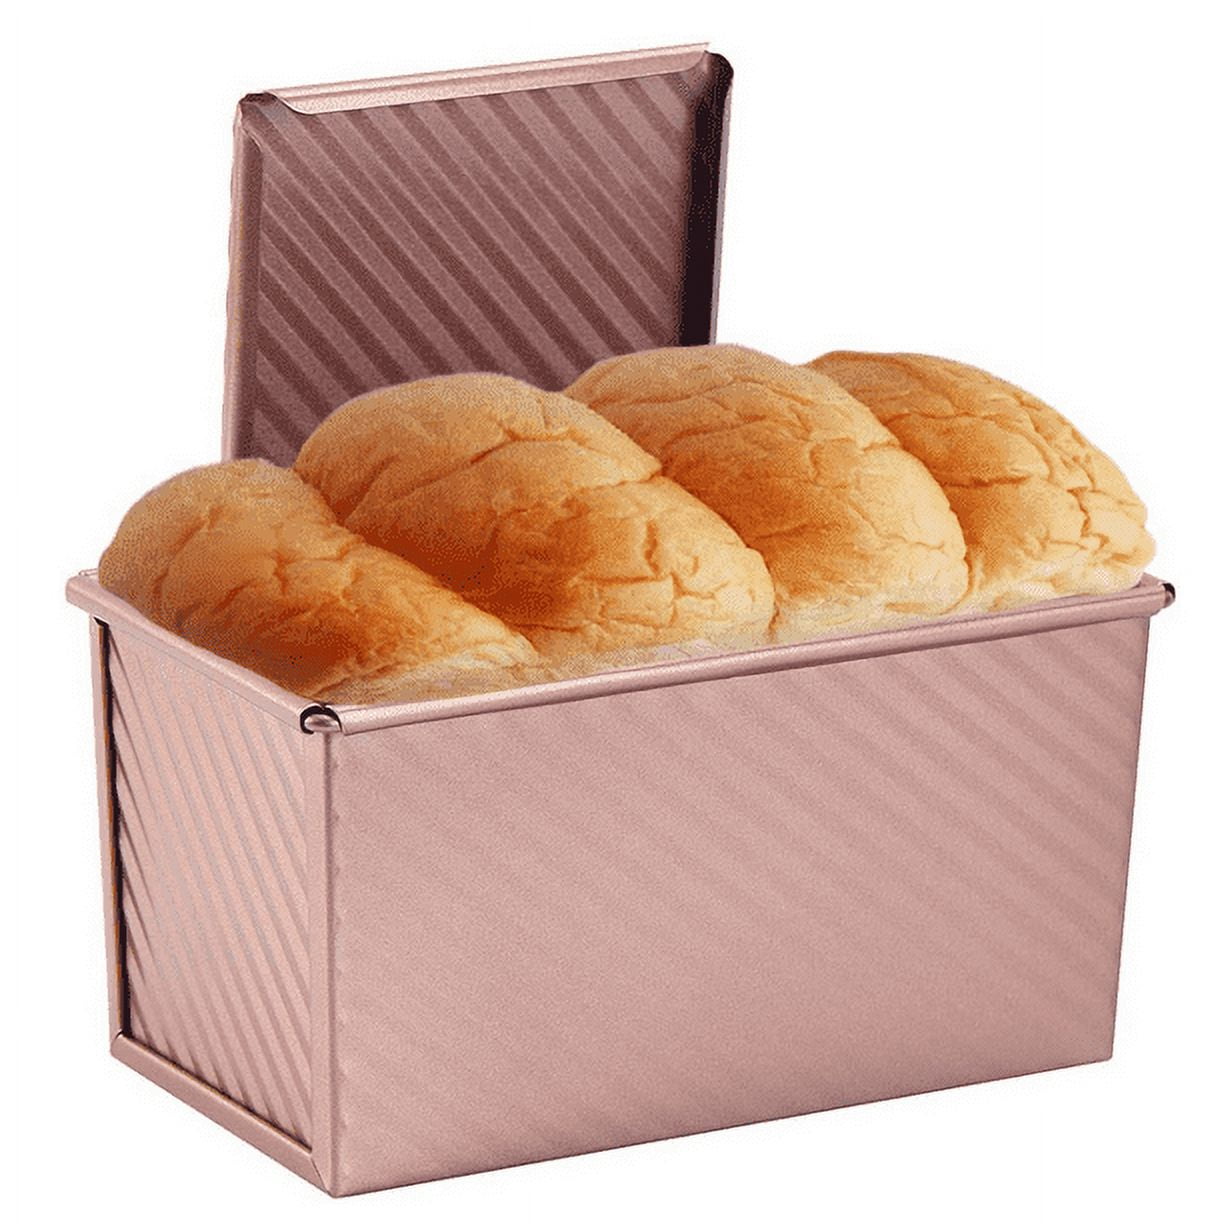 Loaf Pan 4x7.7inch, Loaf Pans For Baking Bread/meat Loaf/toast, Golden  Corrugated Carbon Steel Nonstick Bread Pan With Lid, For Oven Baking